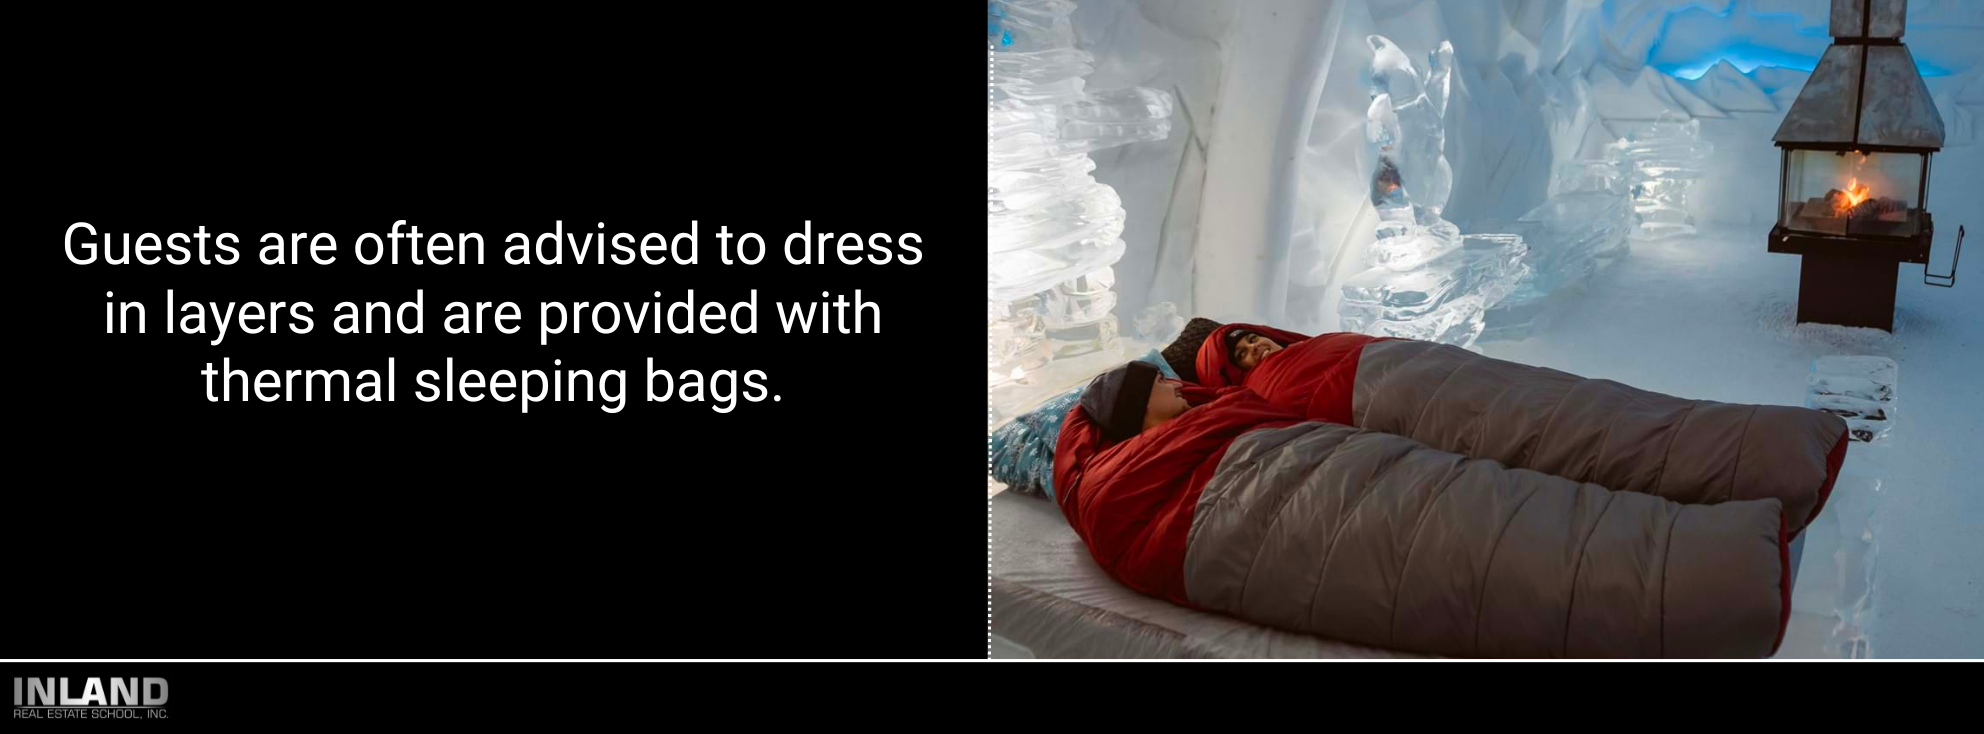 A couple snuggled in thermal sleeping bags on an ice bed, with soft lighting creating a cozy ambiance.